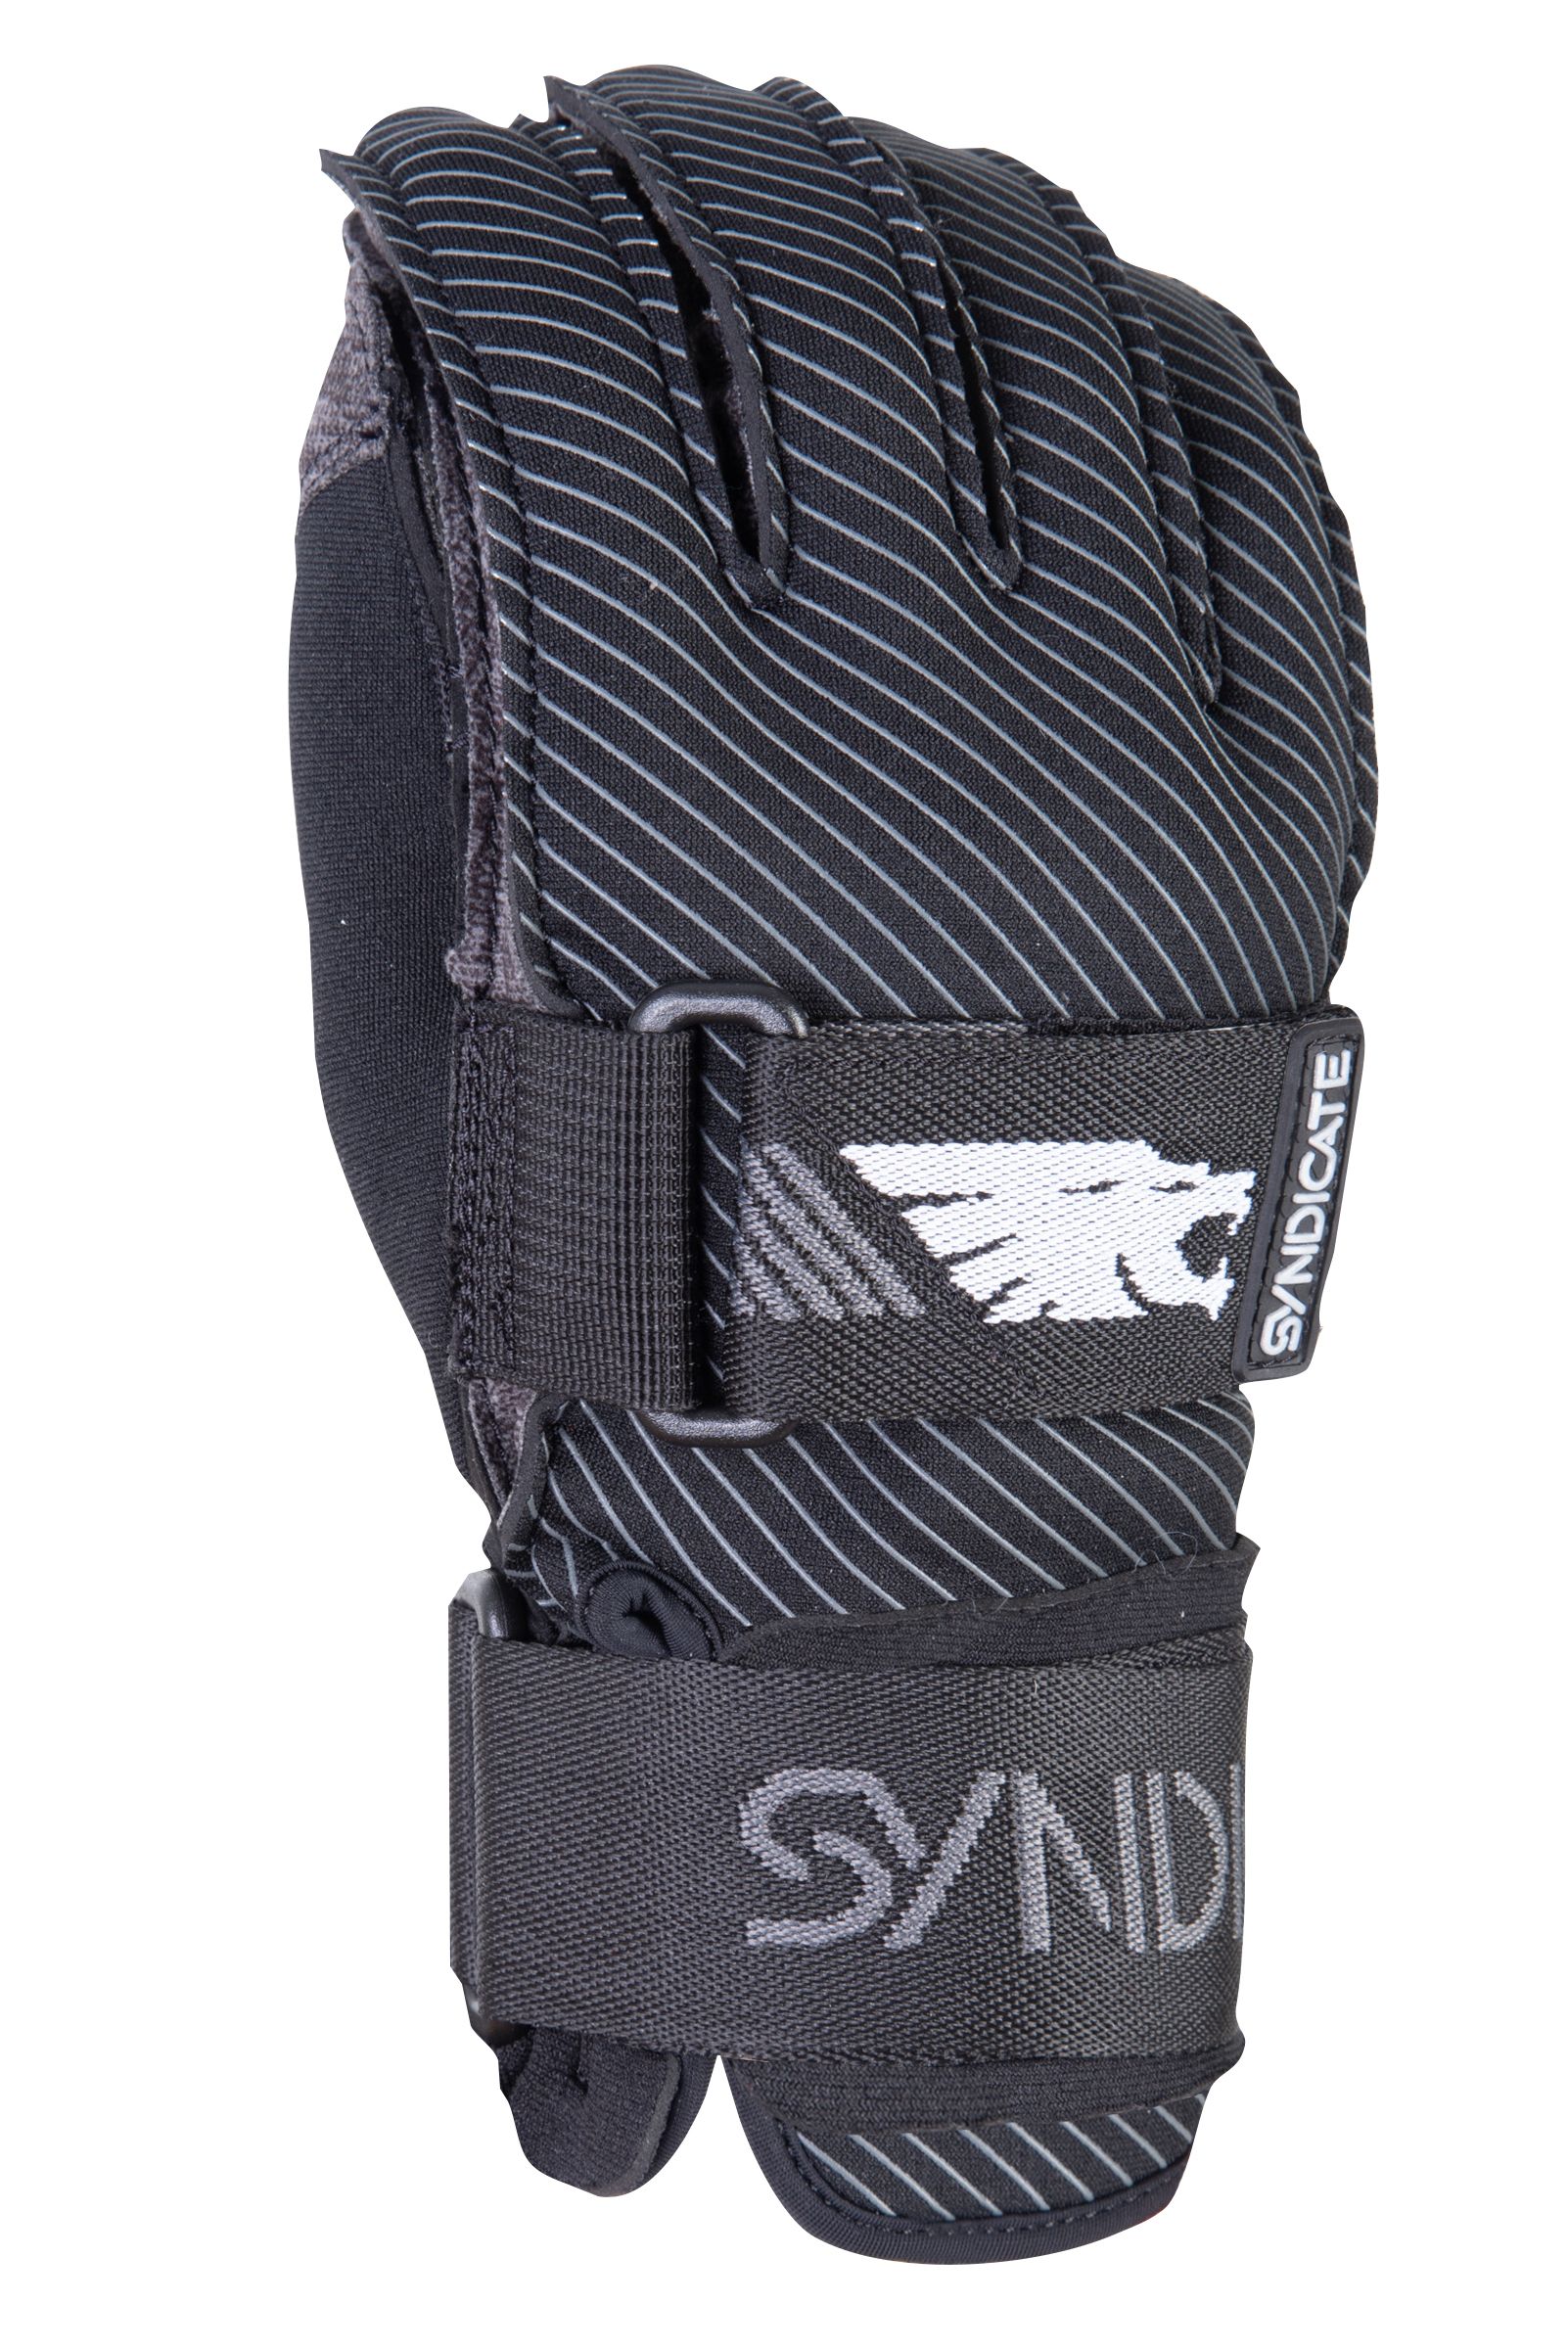 HO SYNDICATE GLOVE 41 TAIL - INSIDE OUT GLOVE - L